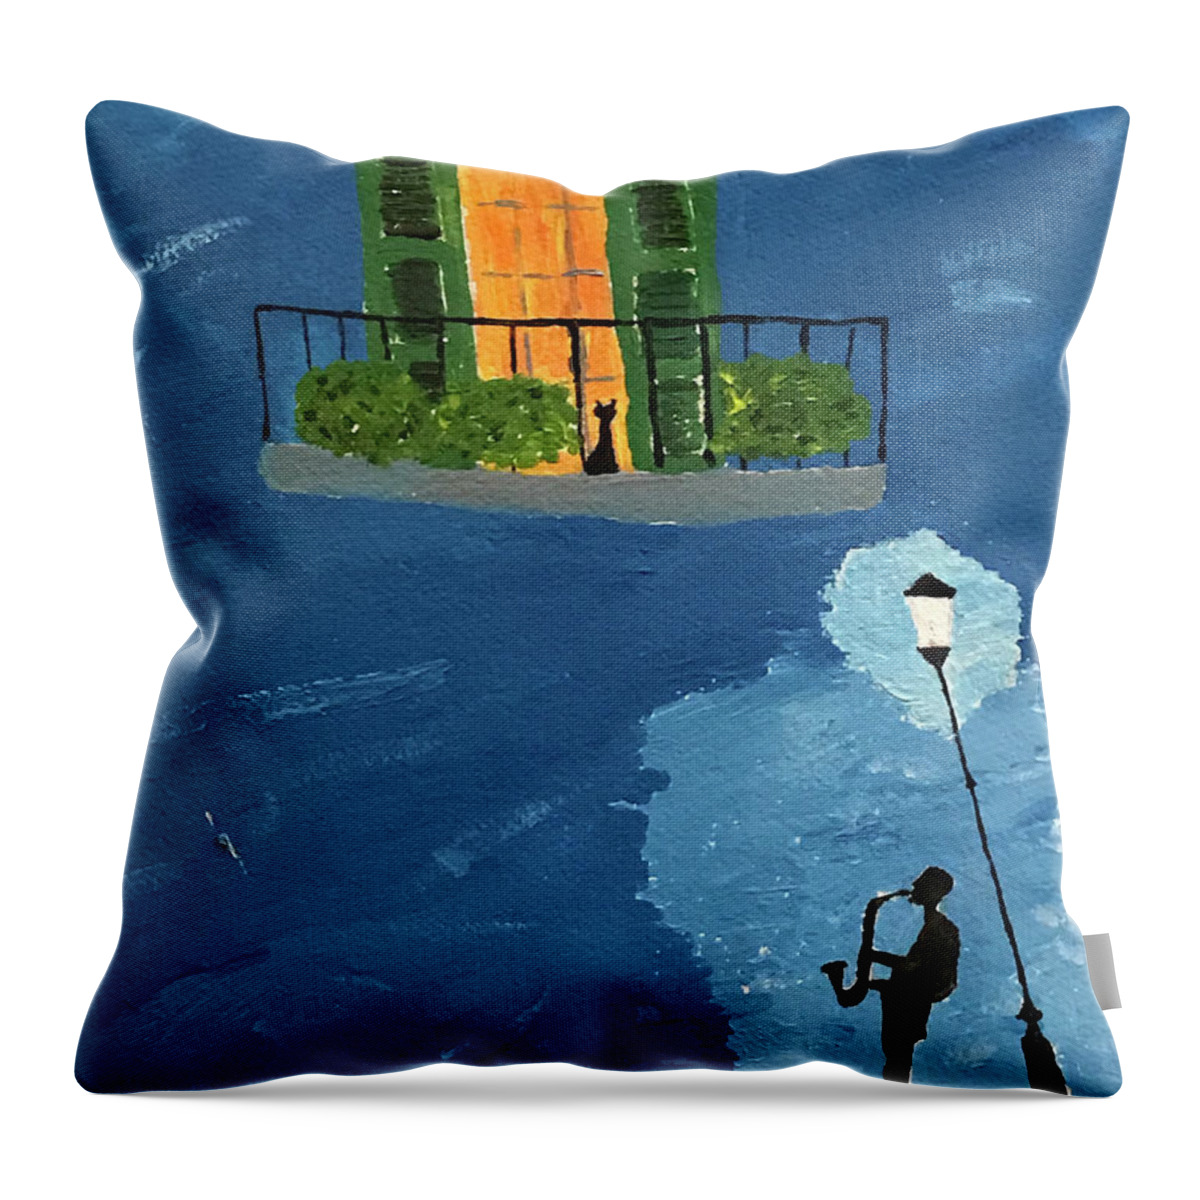  Throw Pillow featuring the painting New Orleans Blues by John Macarthur